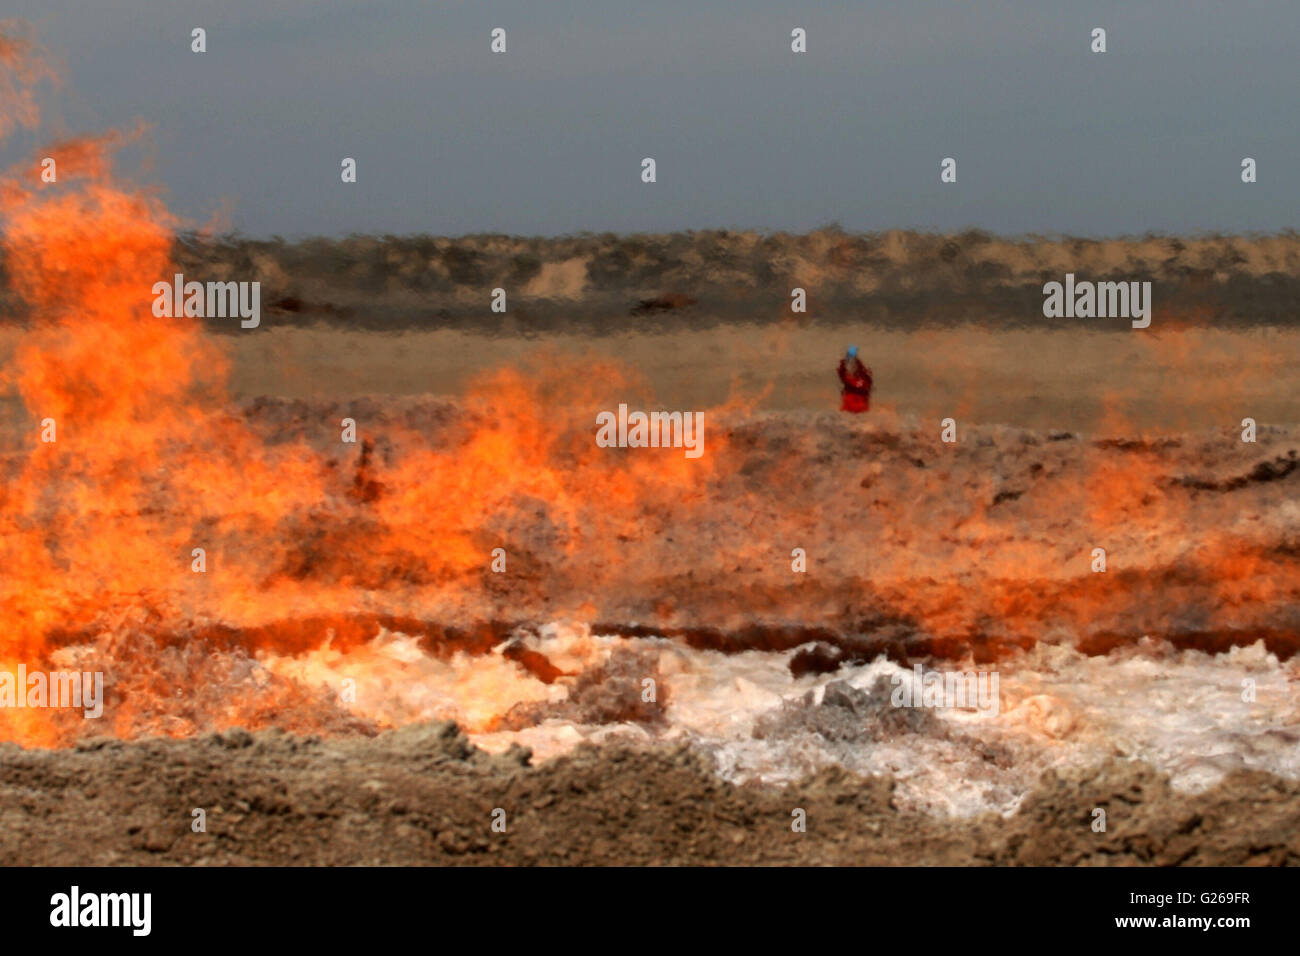 Karakum Desert, Karakum Desert, CHN. 20th May, 2016. Karakum Desert, Turkmenistan - May 20 2016: (EDITORIAL USE ONLY. CHINA OUT) Welcome to the door of the hell! A 10-meter-high flame has been burning for 10 years over the pool in Karakum Desert, Turkmenistan, you can see it at a distance of 2 kilometers, also known as the Darvaza Crater. There was an accident in 1971 when drilling for gas. © SIPA Asia/ZUMA Wire/Alamy Live News Stock Photo